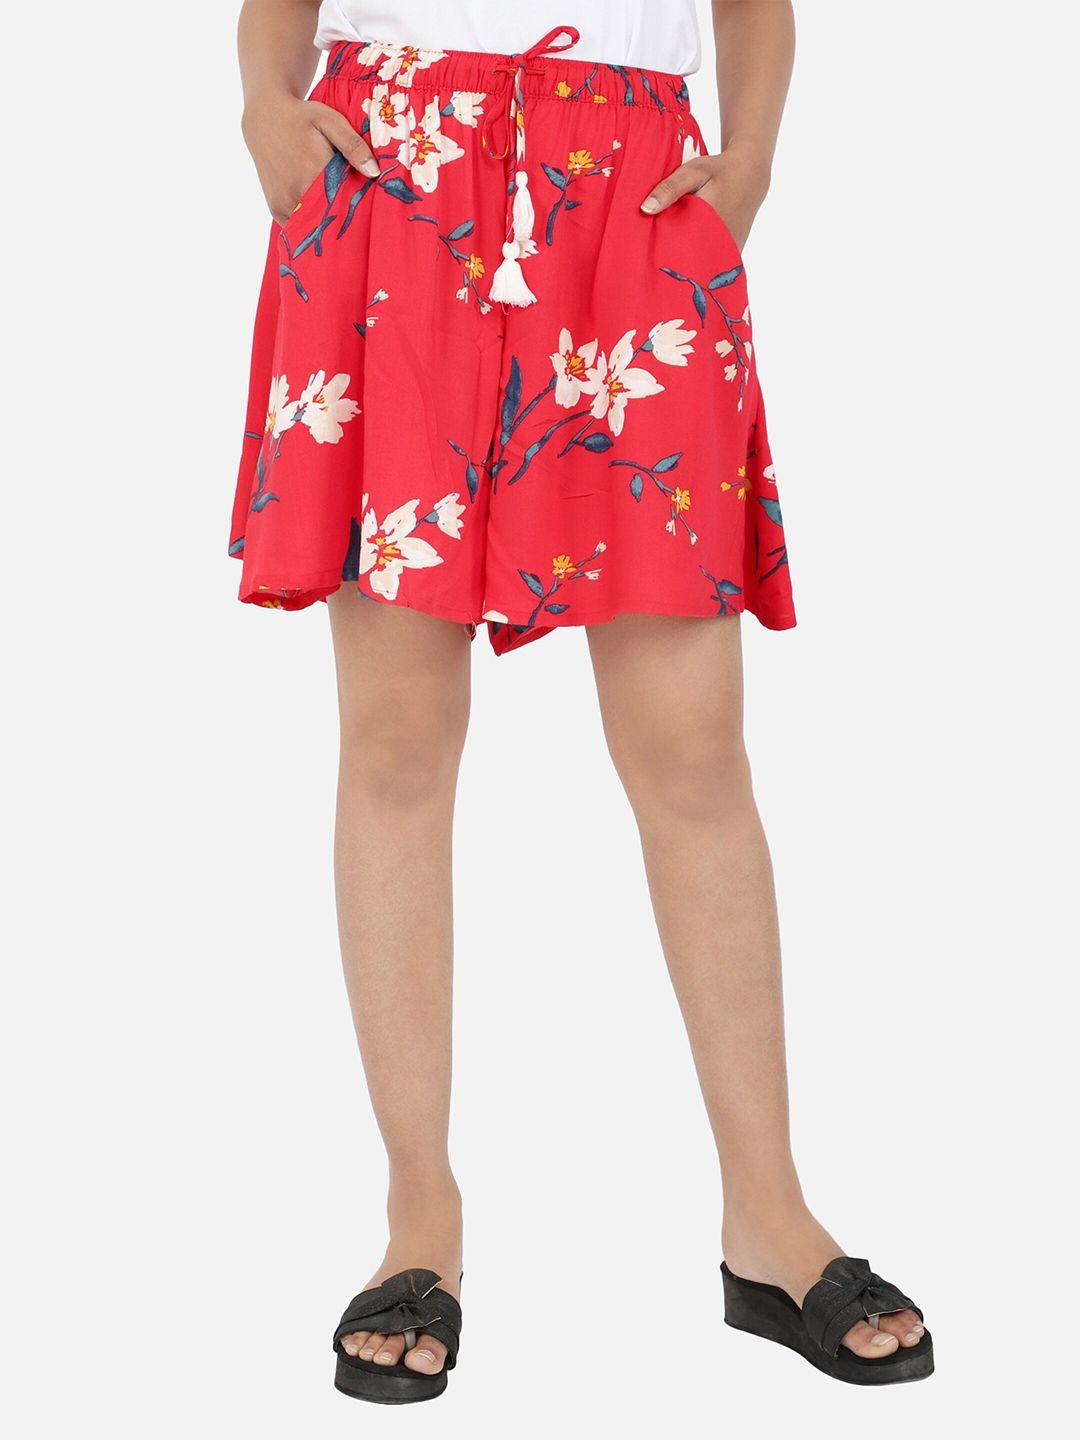 bstories-women-red-&-grey-floral-printed-lounge-shorts